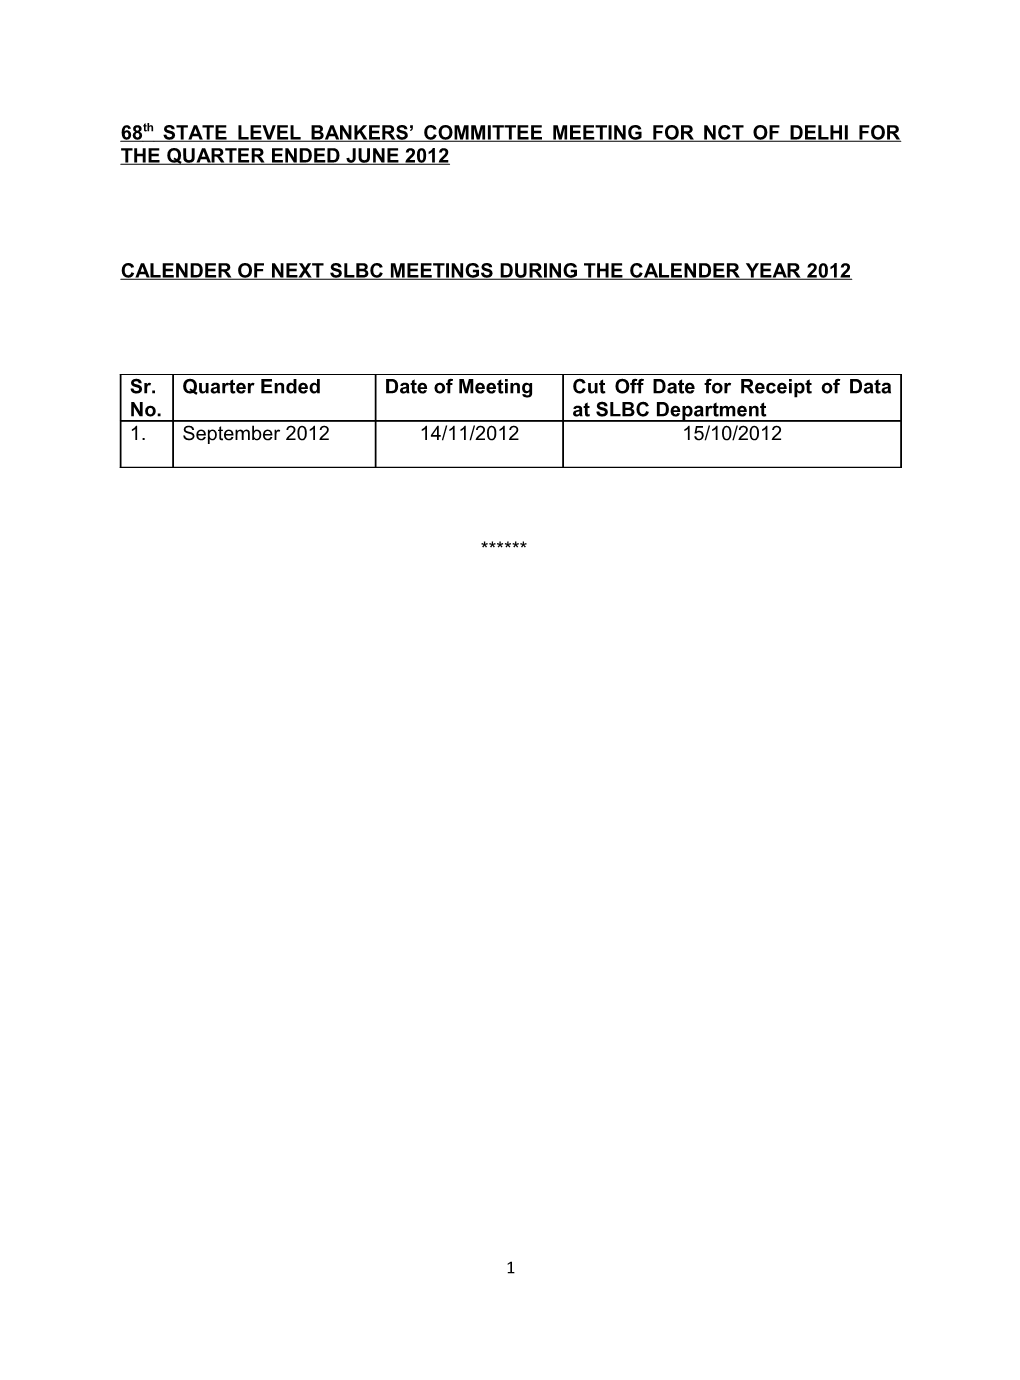 Calender of Next Slbc Meetings During the Calender Year 2012